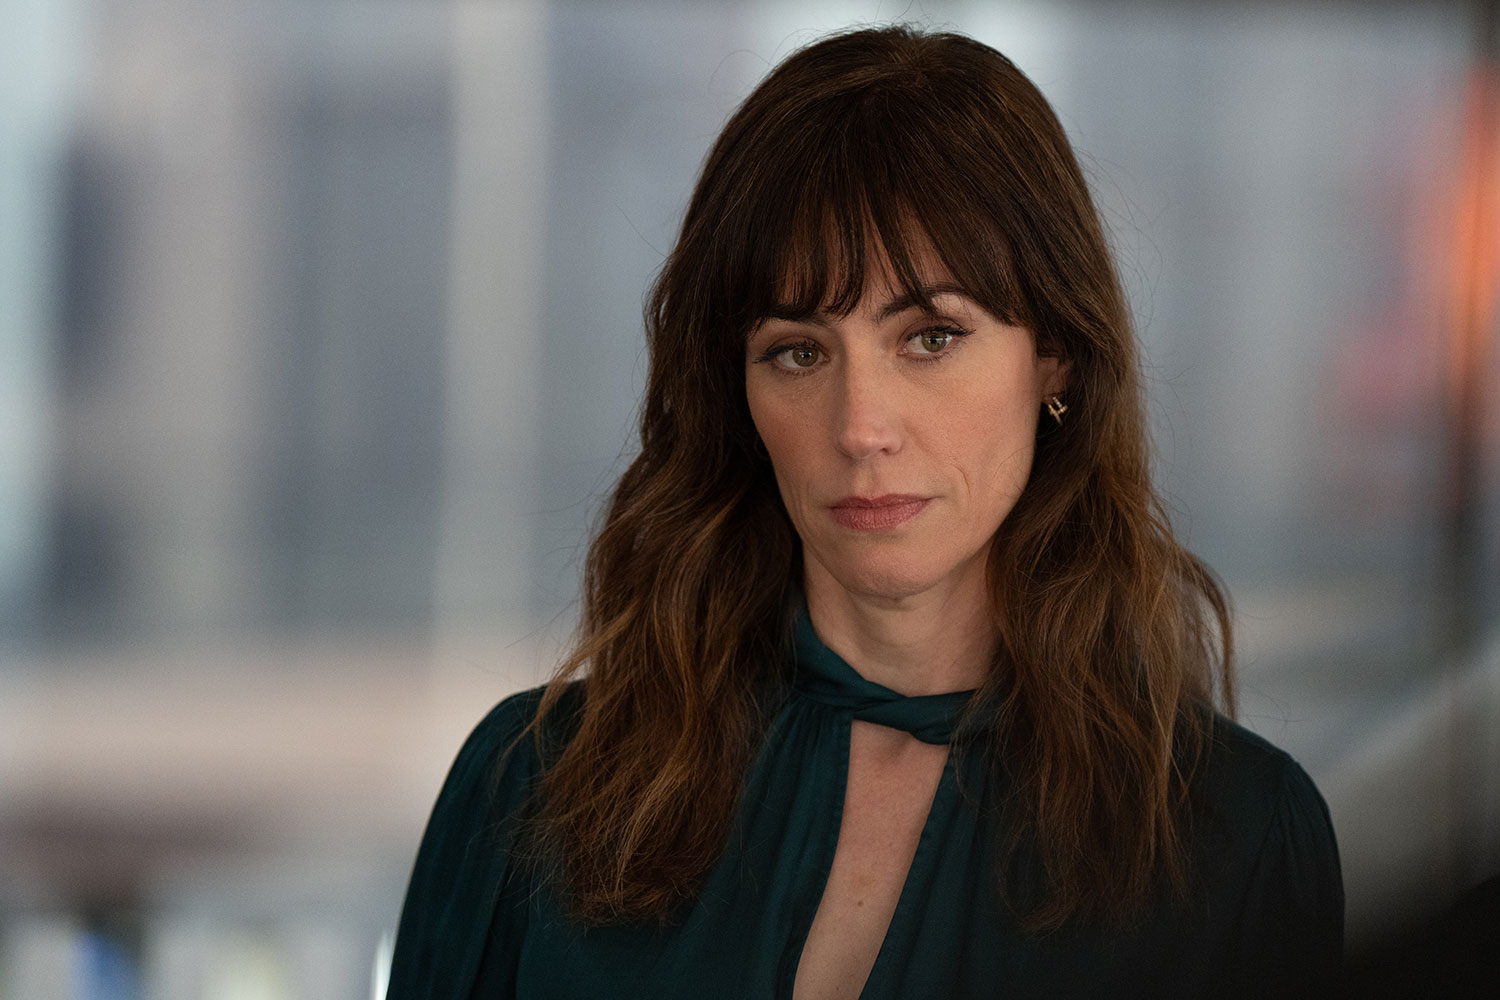 Maggie Siff as Wendy Rhoades in BILLIONS, "Tower of London". Photo Credit: Christopher T. Saunders/SHOWTIME.